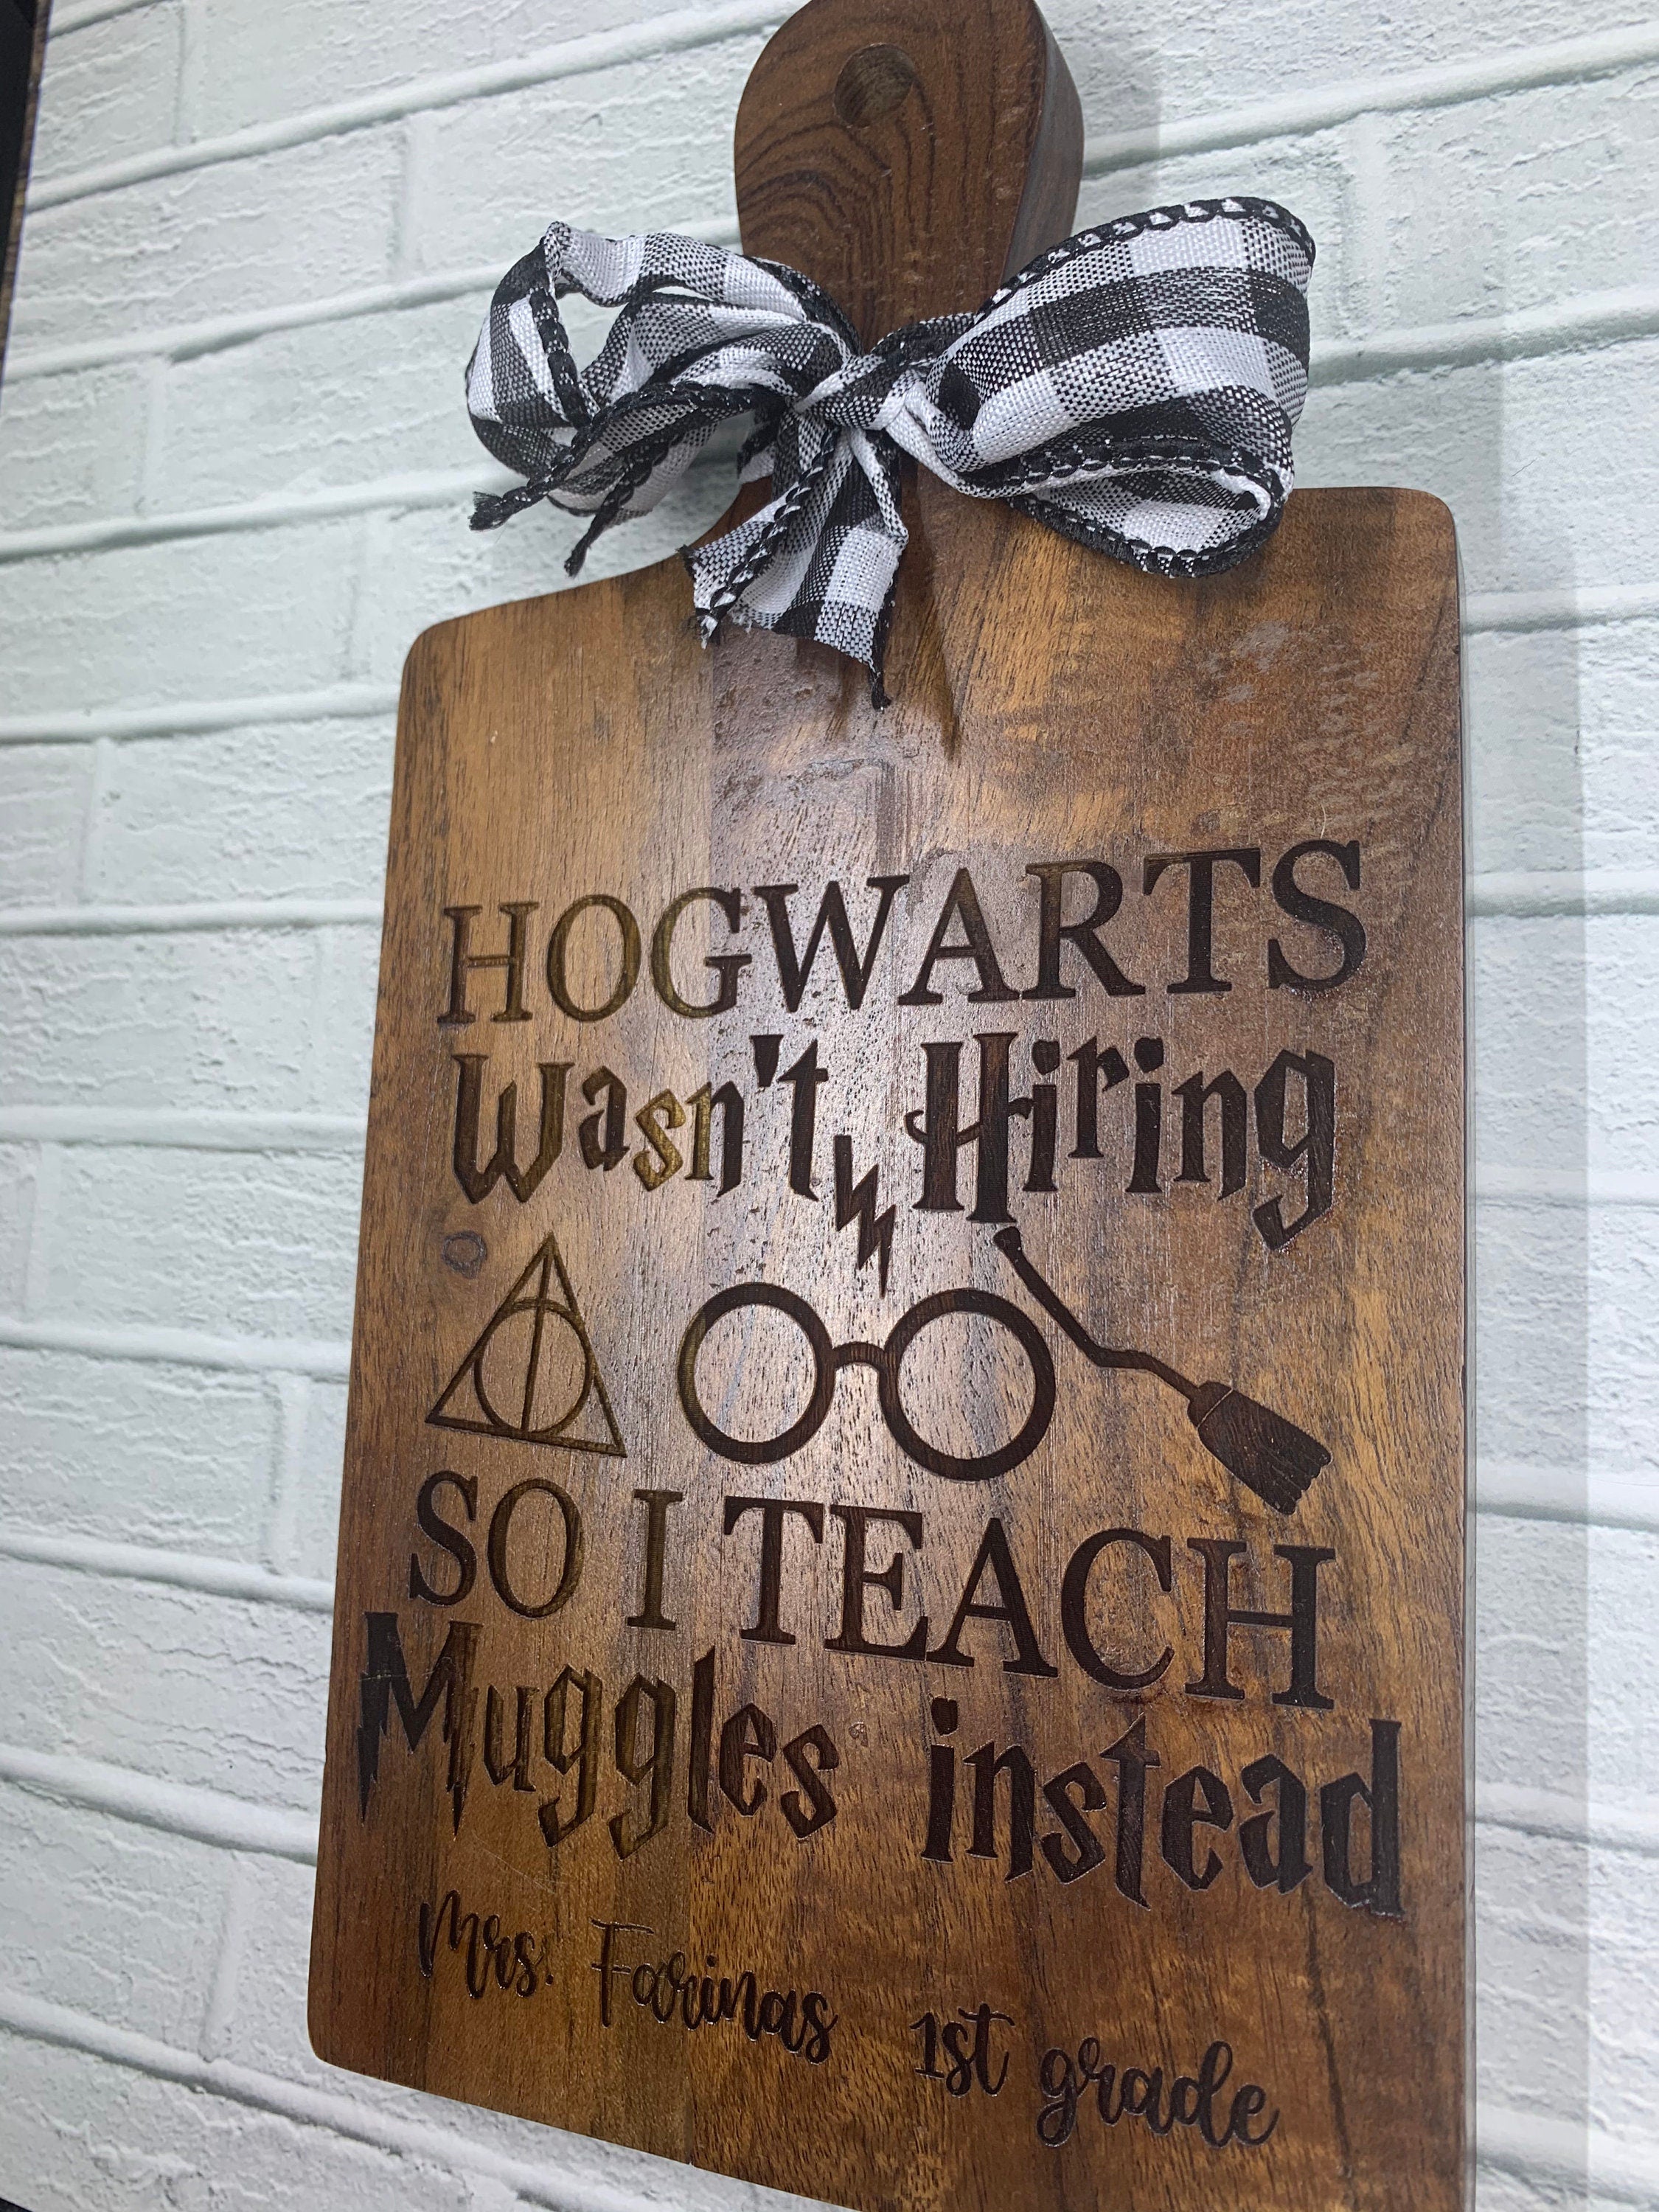 42 Harry Potter Gifts to Buy the Wizard in Your Life – PureWow